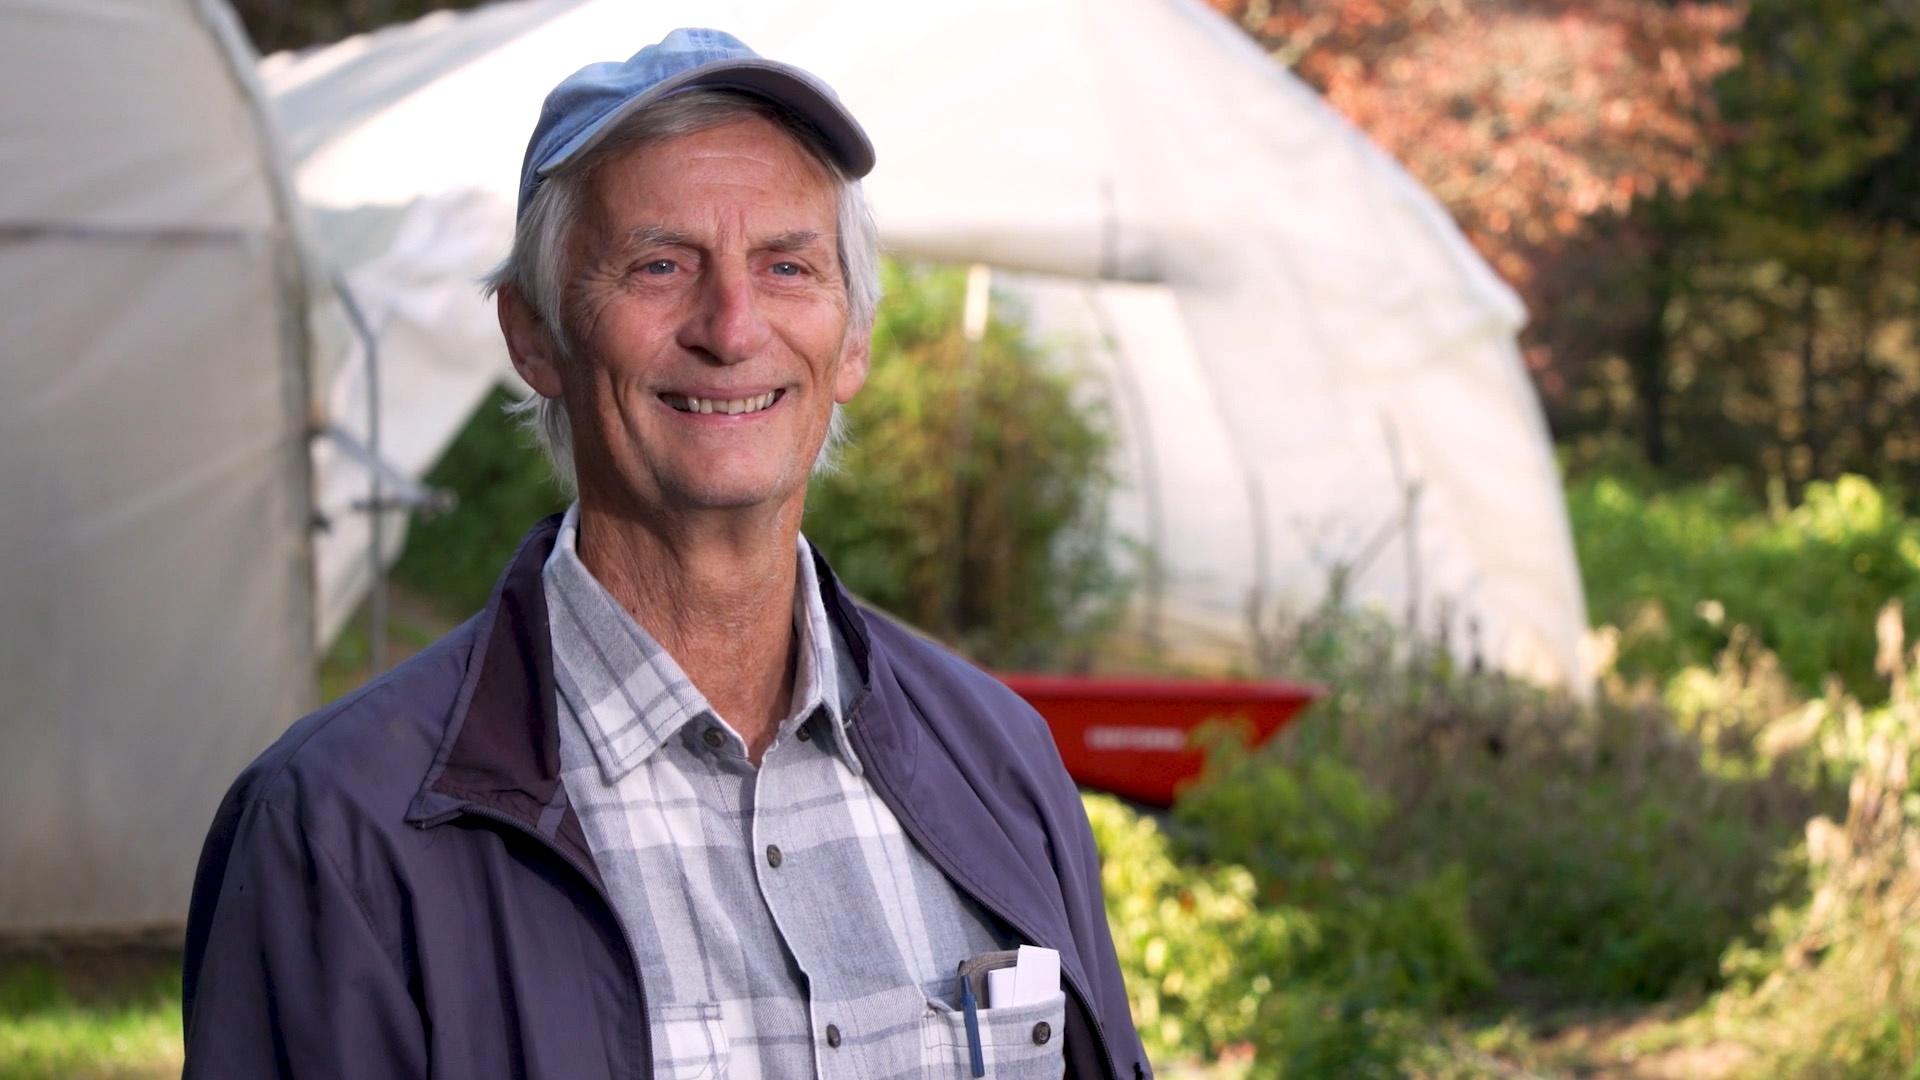 An older white man smiles in front of his farm's greenhouses.